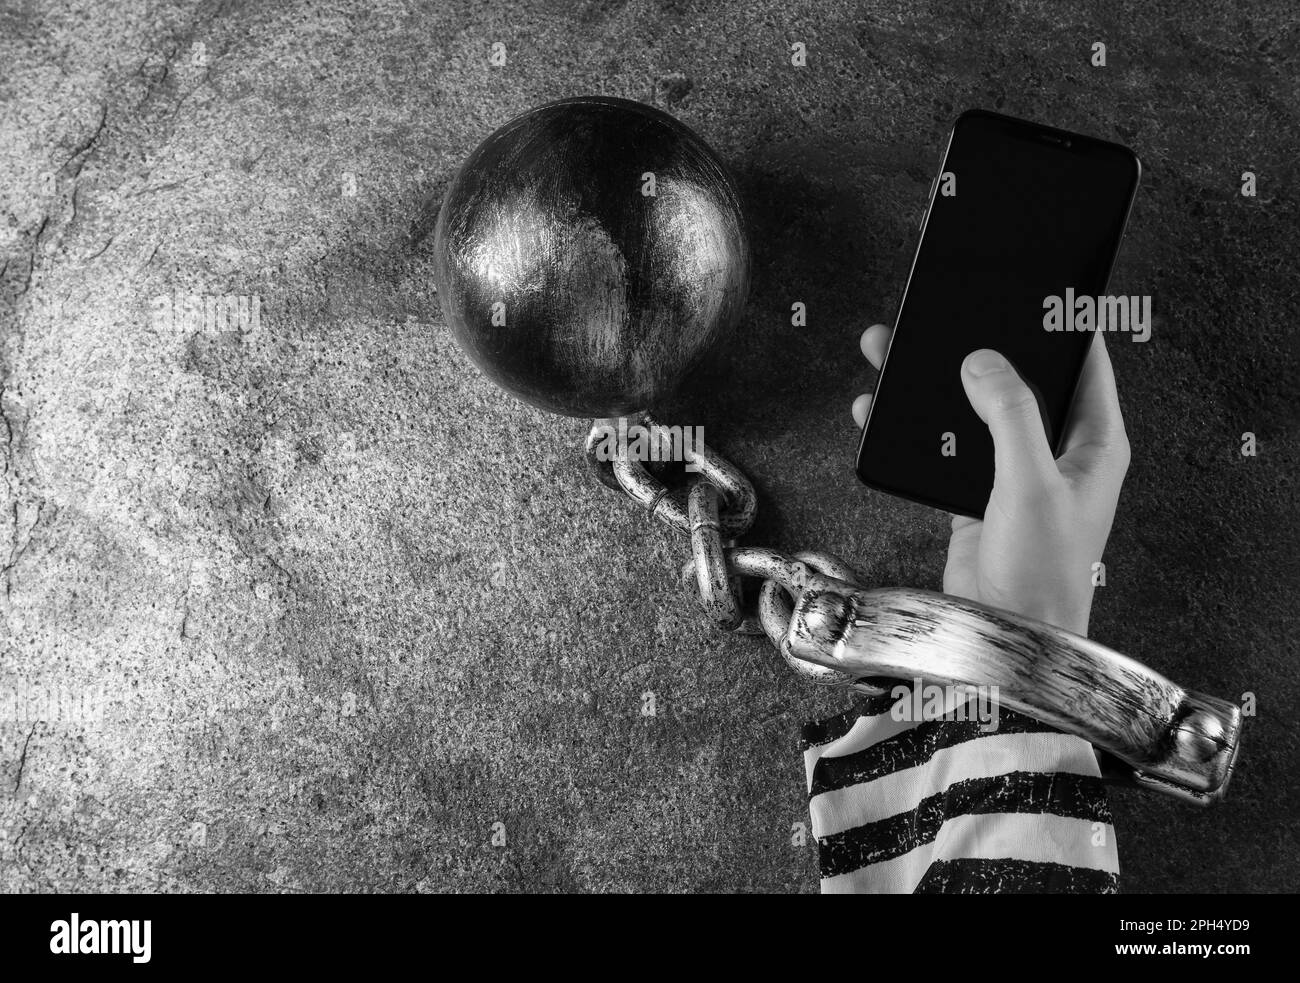 Top view of internet addicted woman in prisoner's clothes with ball and chain on her hand using smartphone at grey table, space for text. Black and wh Stock Photo